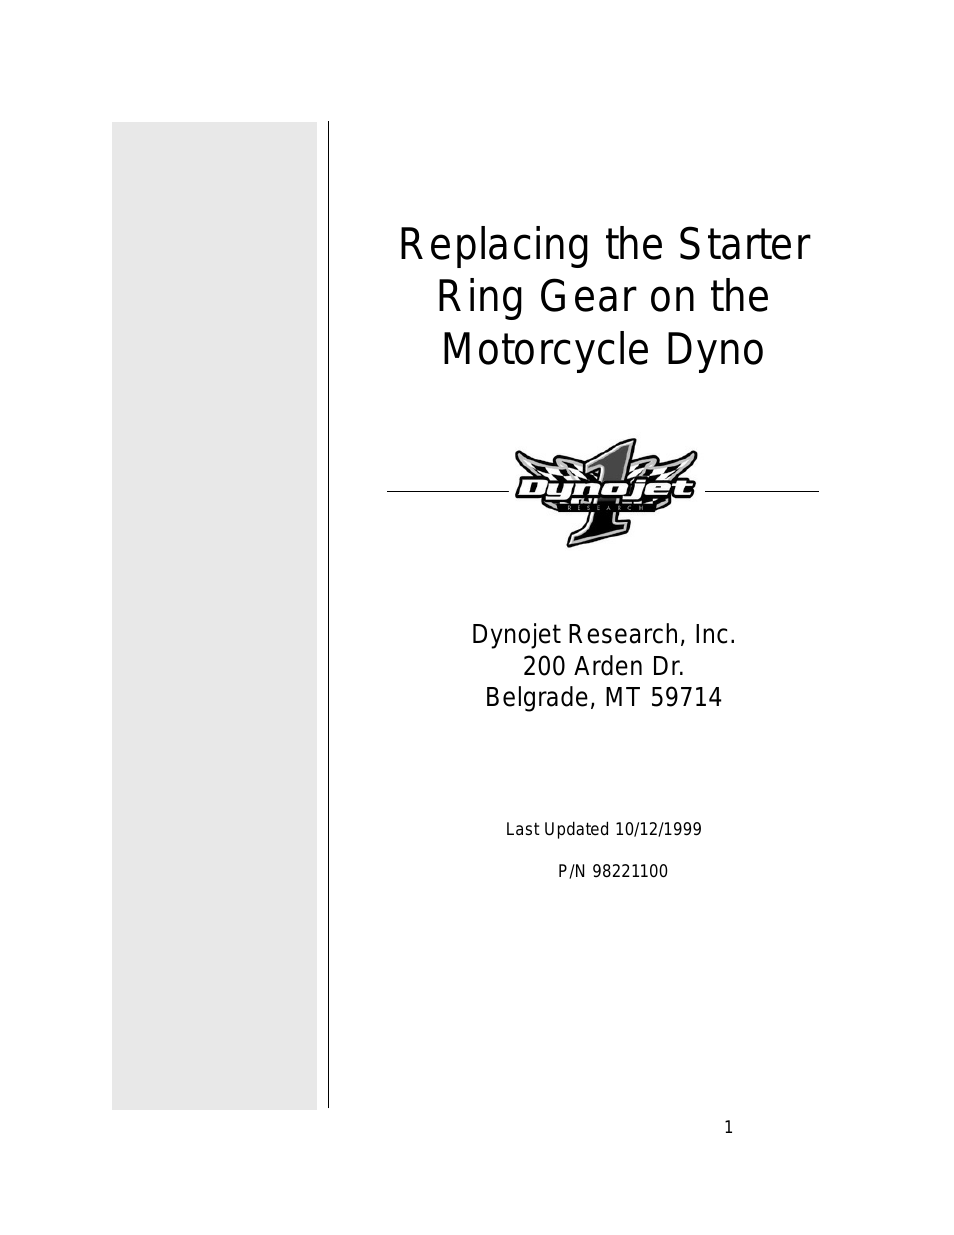 200: Replacing the Starter Ring Gear